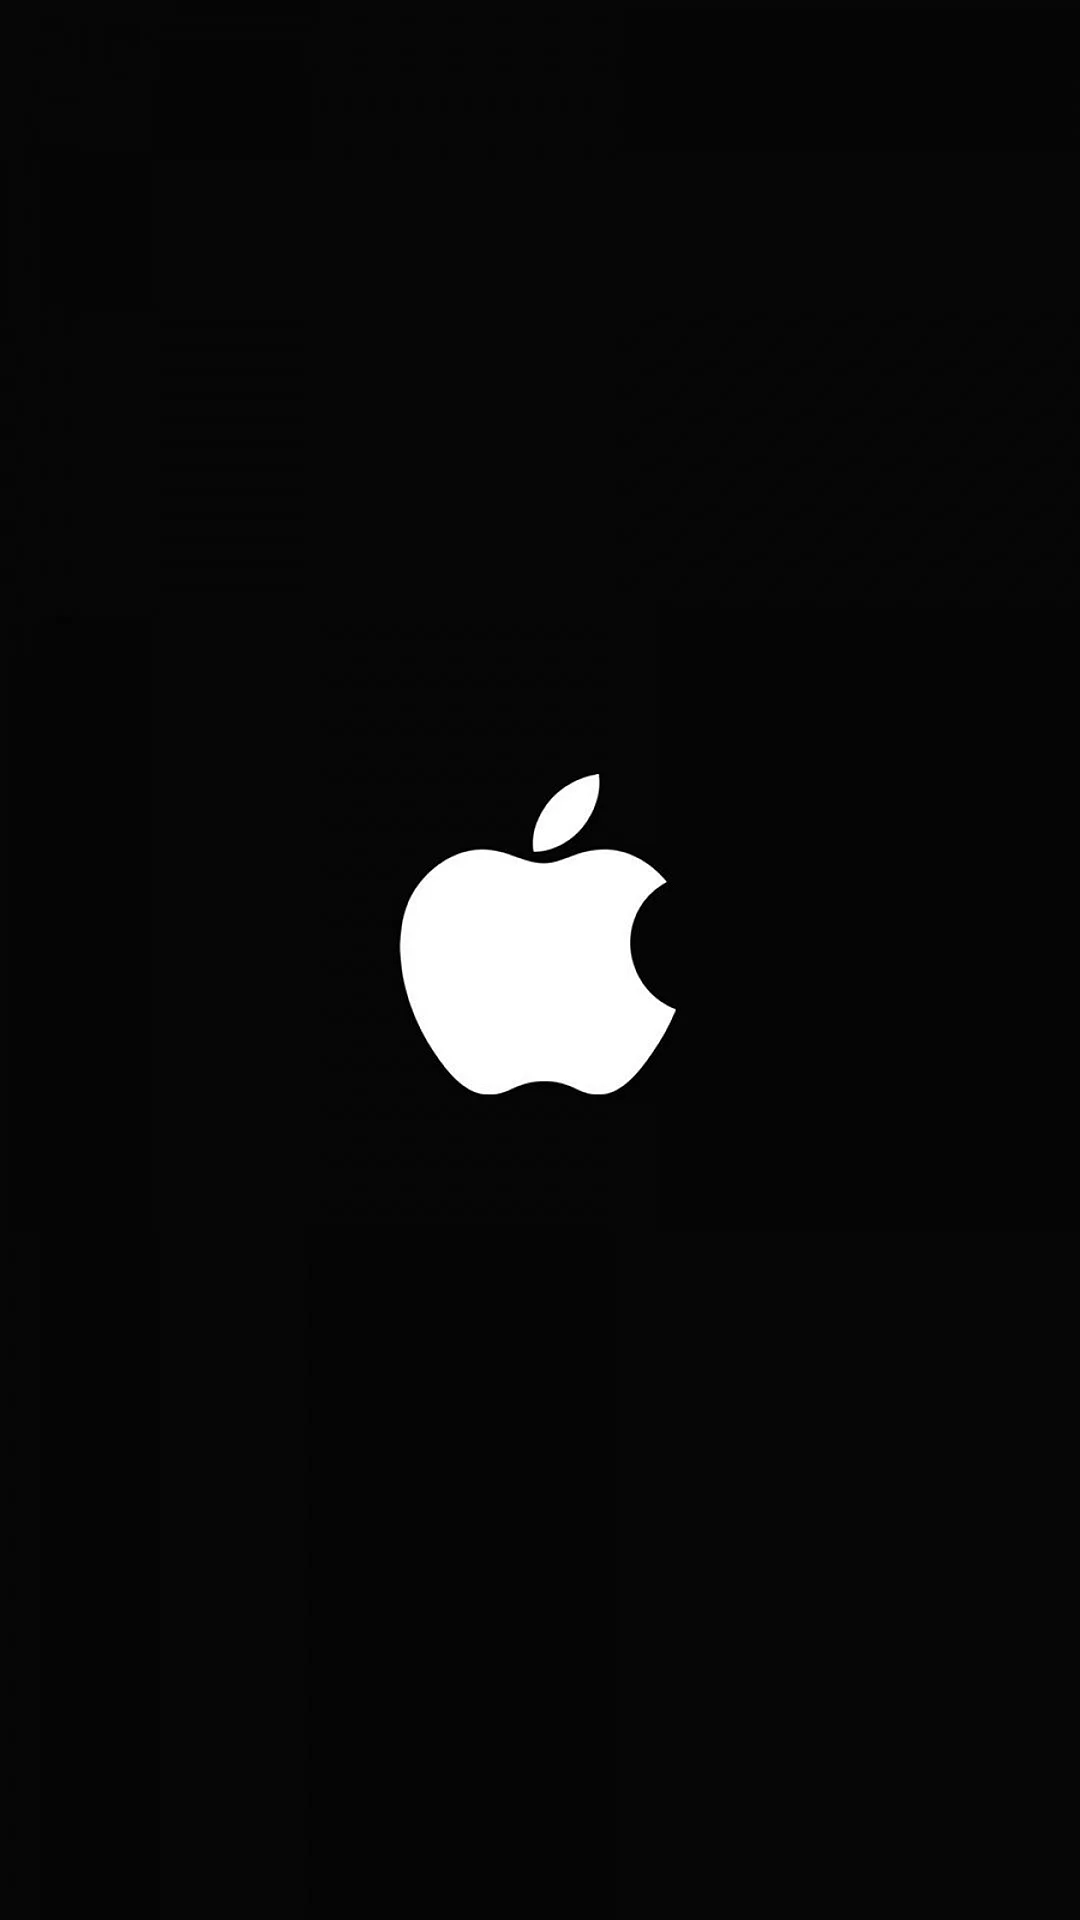 Apple Logo HD Wallpapers For iPhone – Wallpapers High Resolution